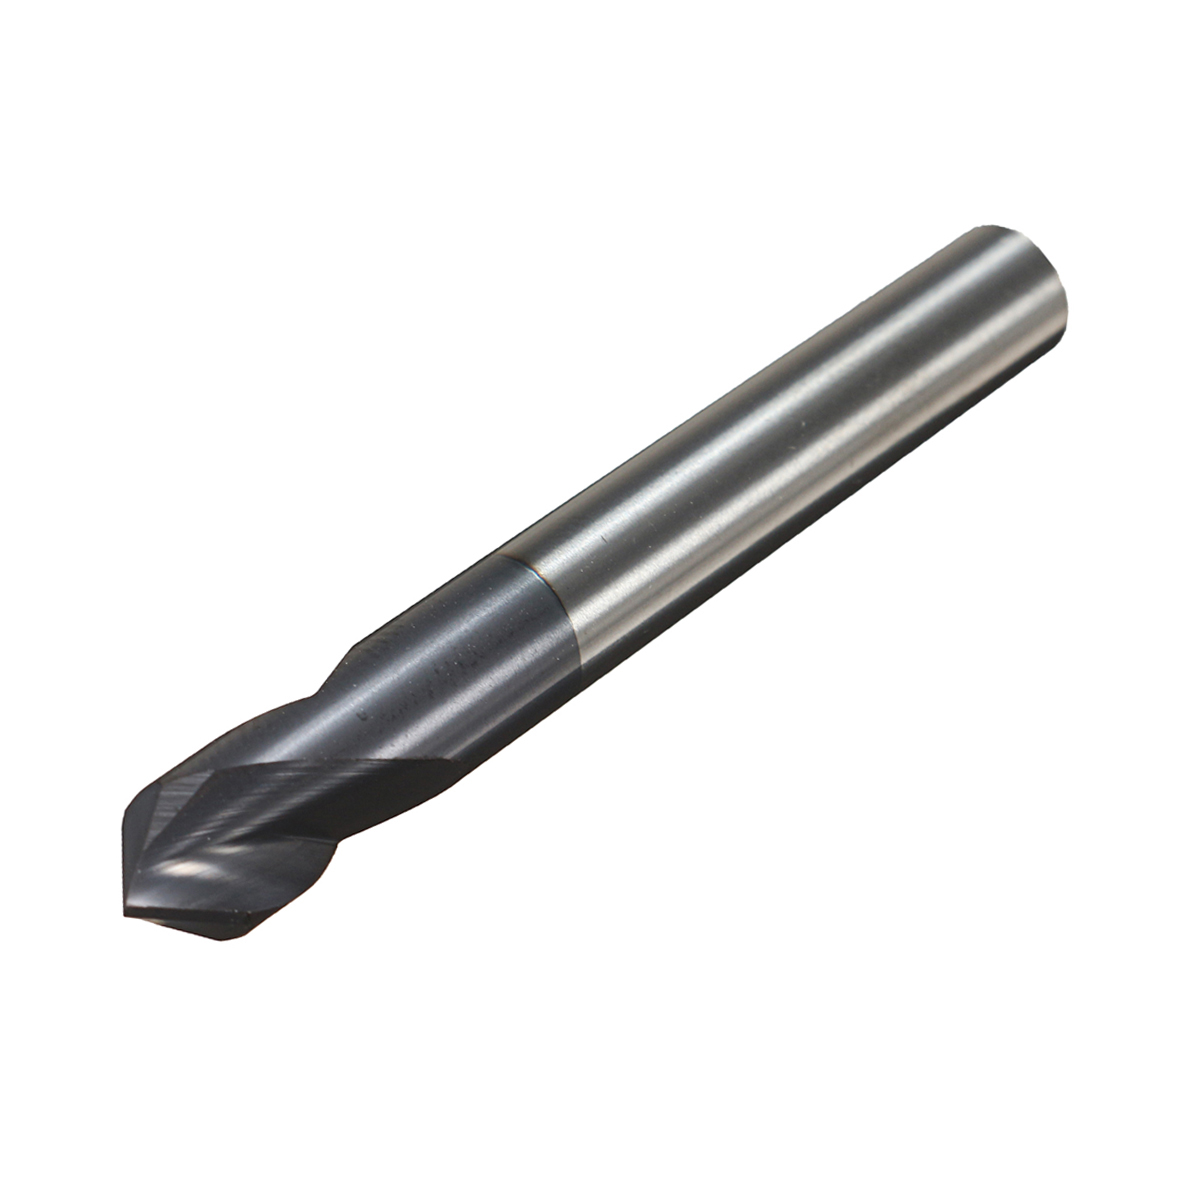 Drillpro-5pcs-6mm-90-Degree-Chamfer-Mill-2-Flutes-HRC45-Carbide-End-Milling-Cutter-1607282-2